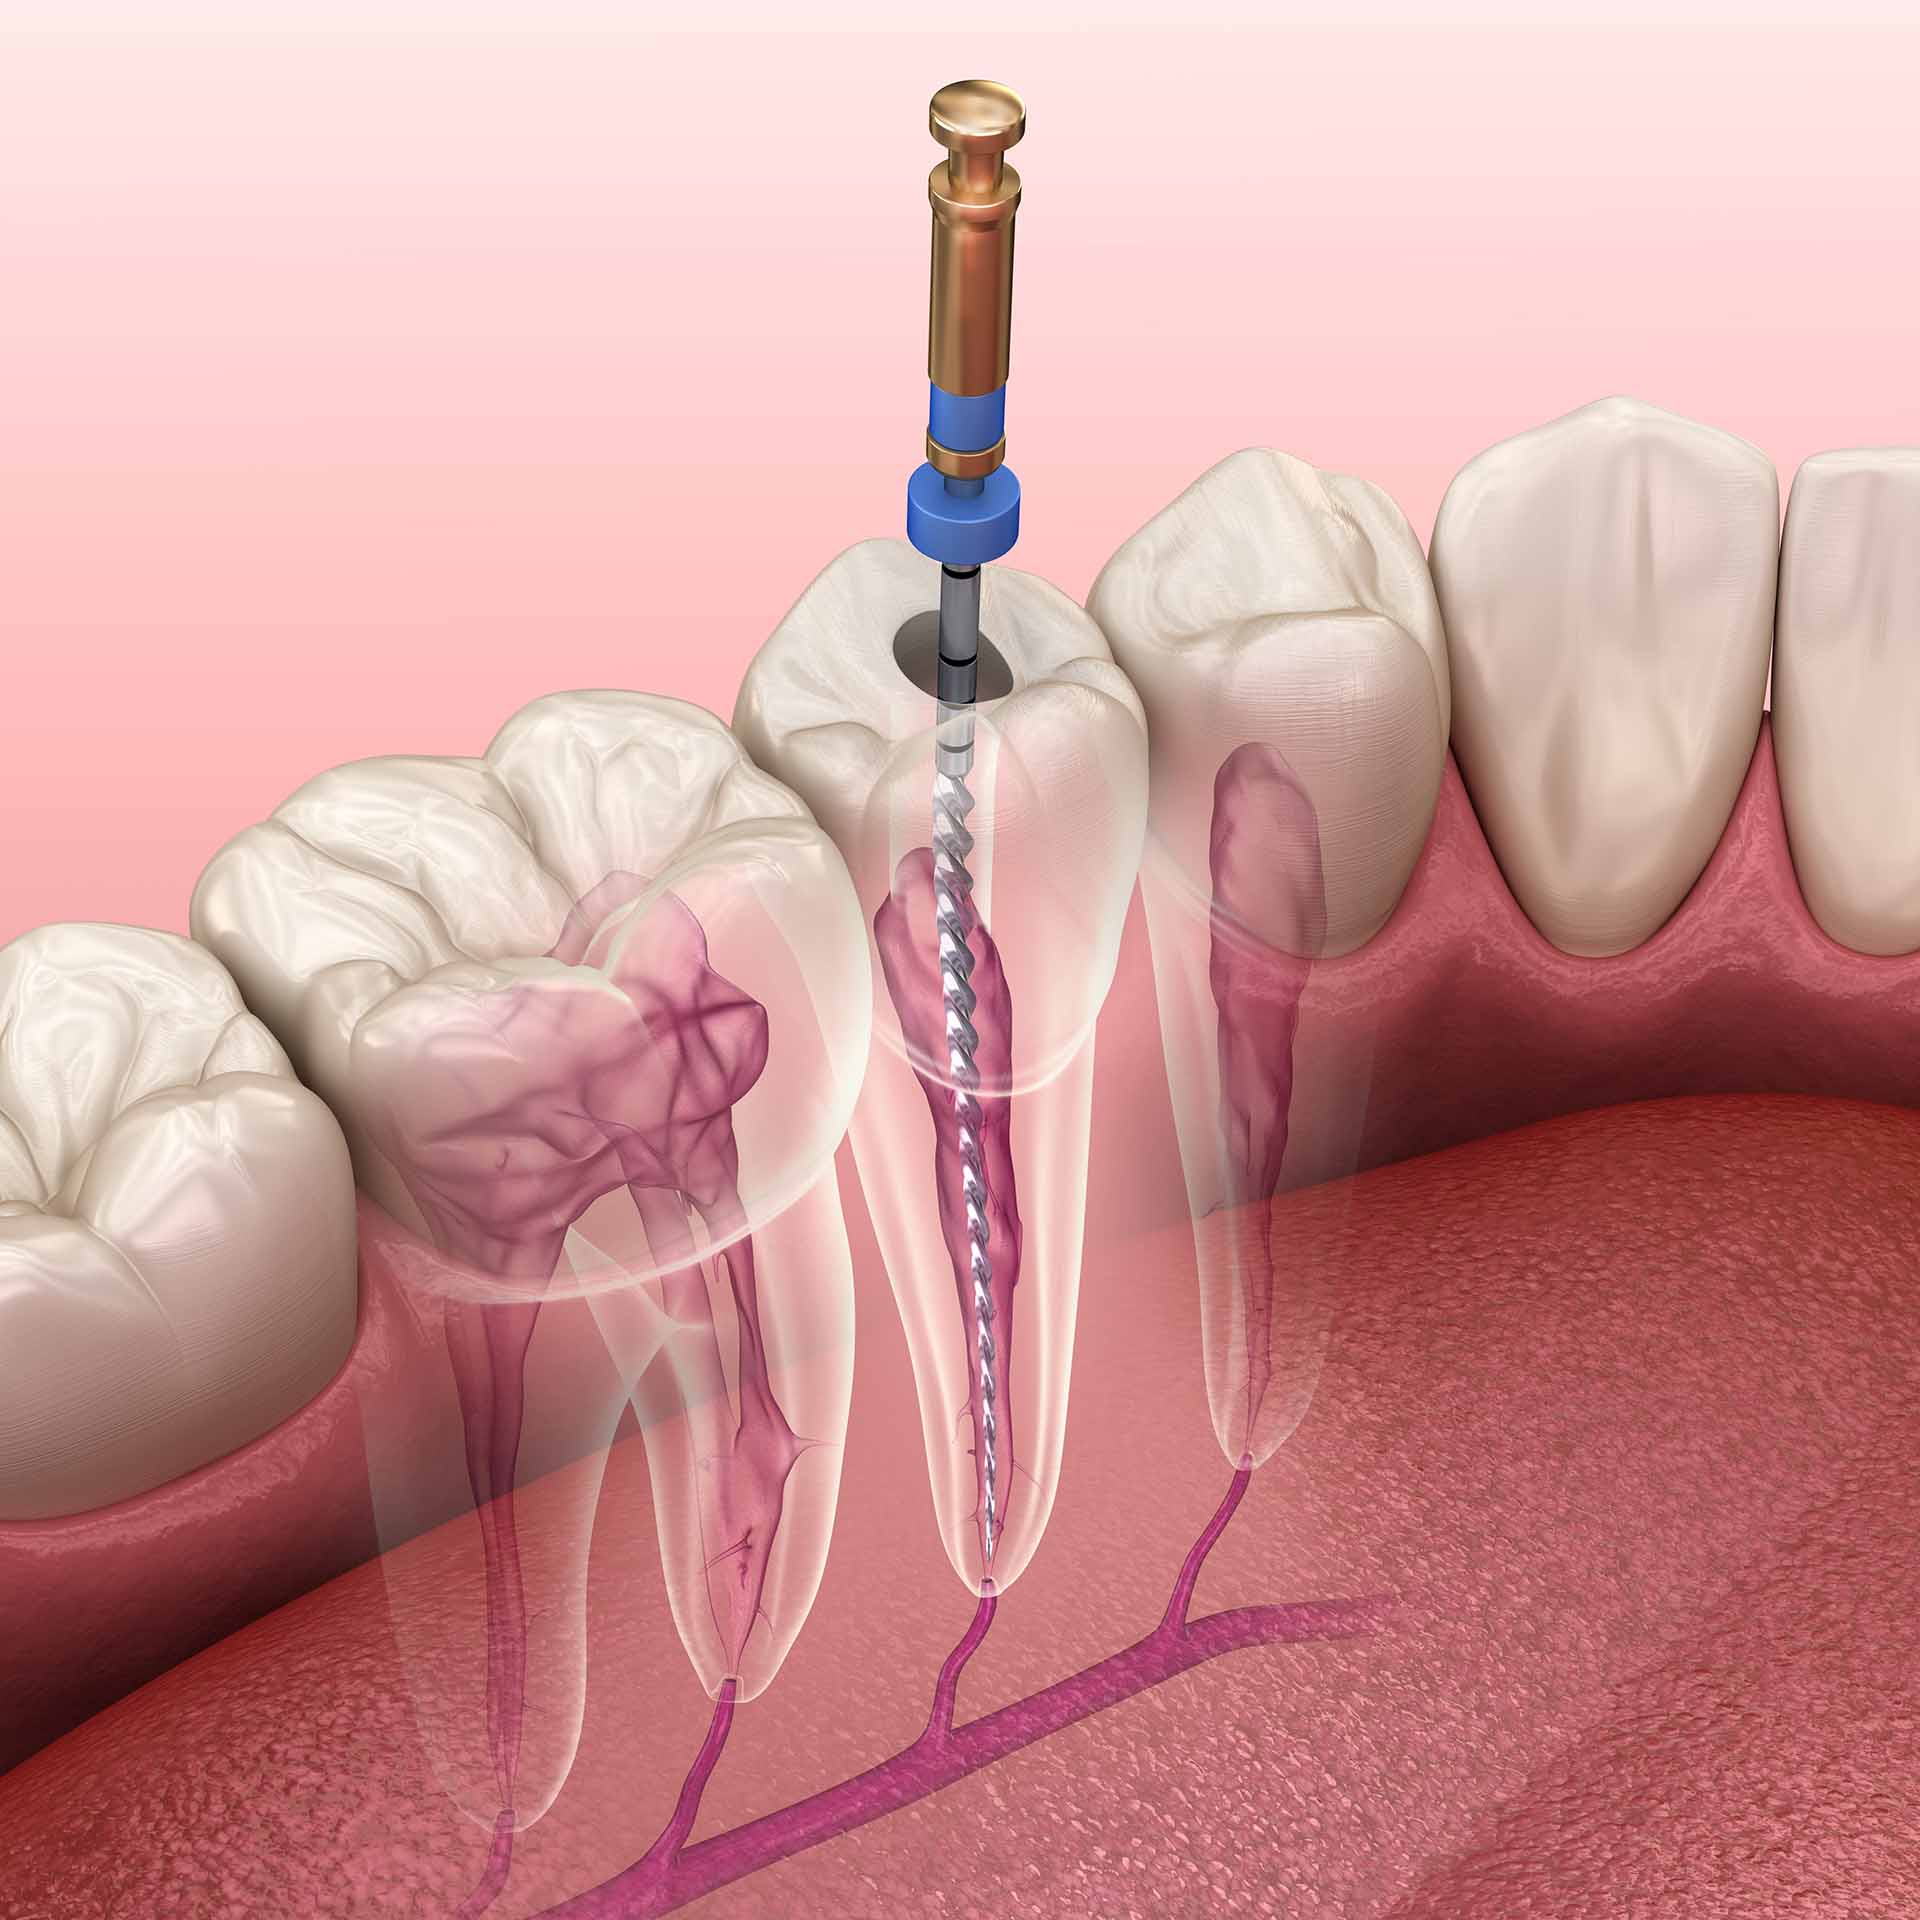 Endodontic root canal treatment process. Medically accurate tooth 3D illustration. Ivy Lane Dentistry offers root canal treatment for patients in San Antonio, TX